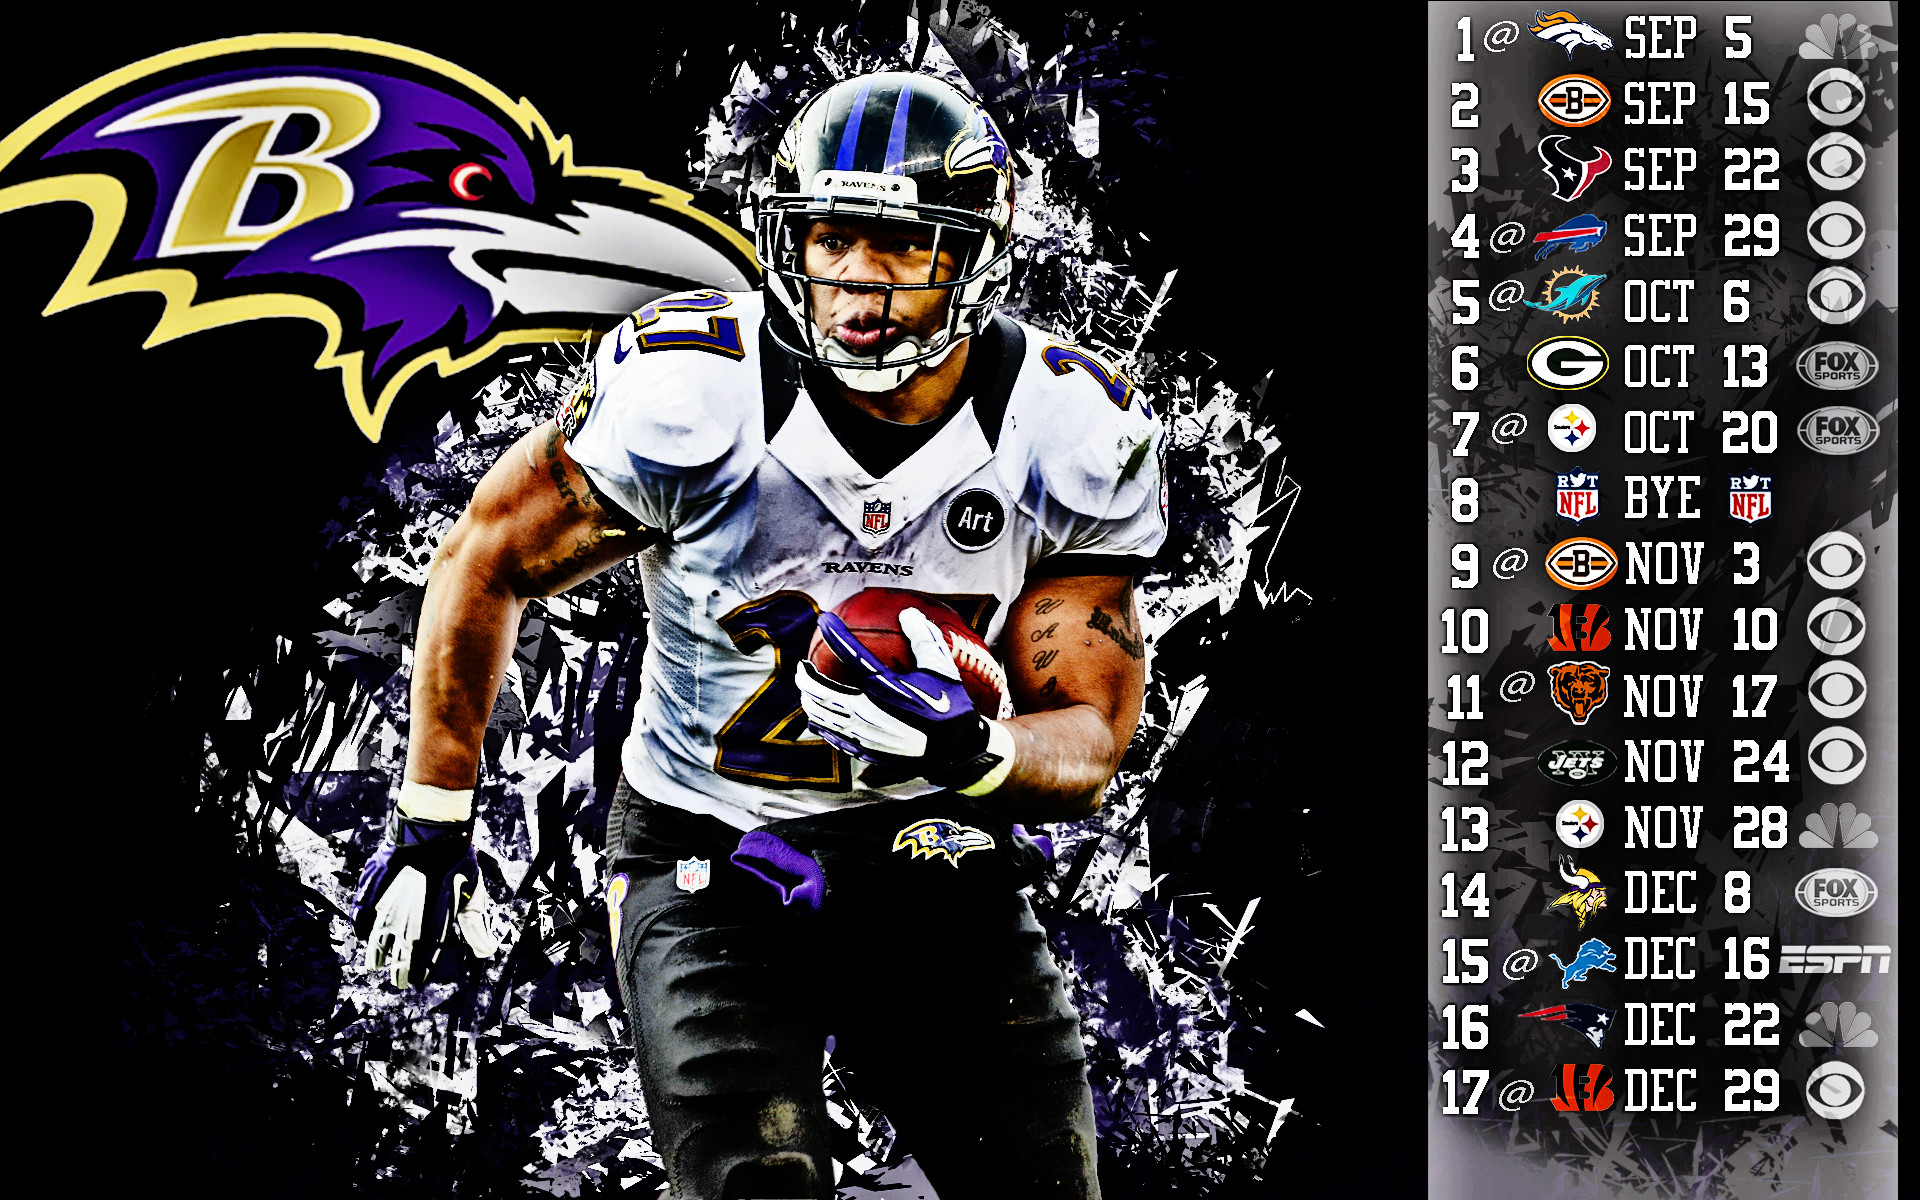 1920x1200 ... backgrounds for baltimore ravens football players background www ...